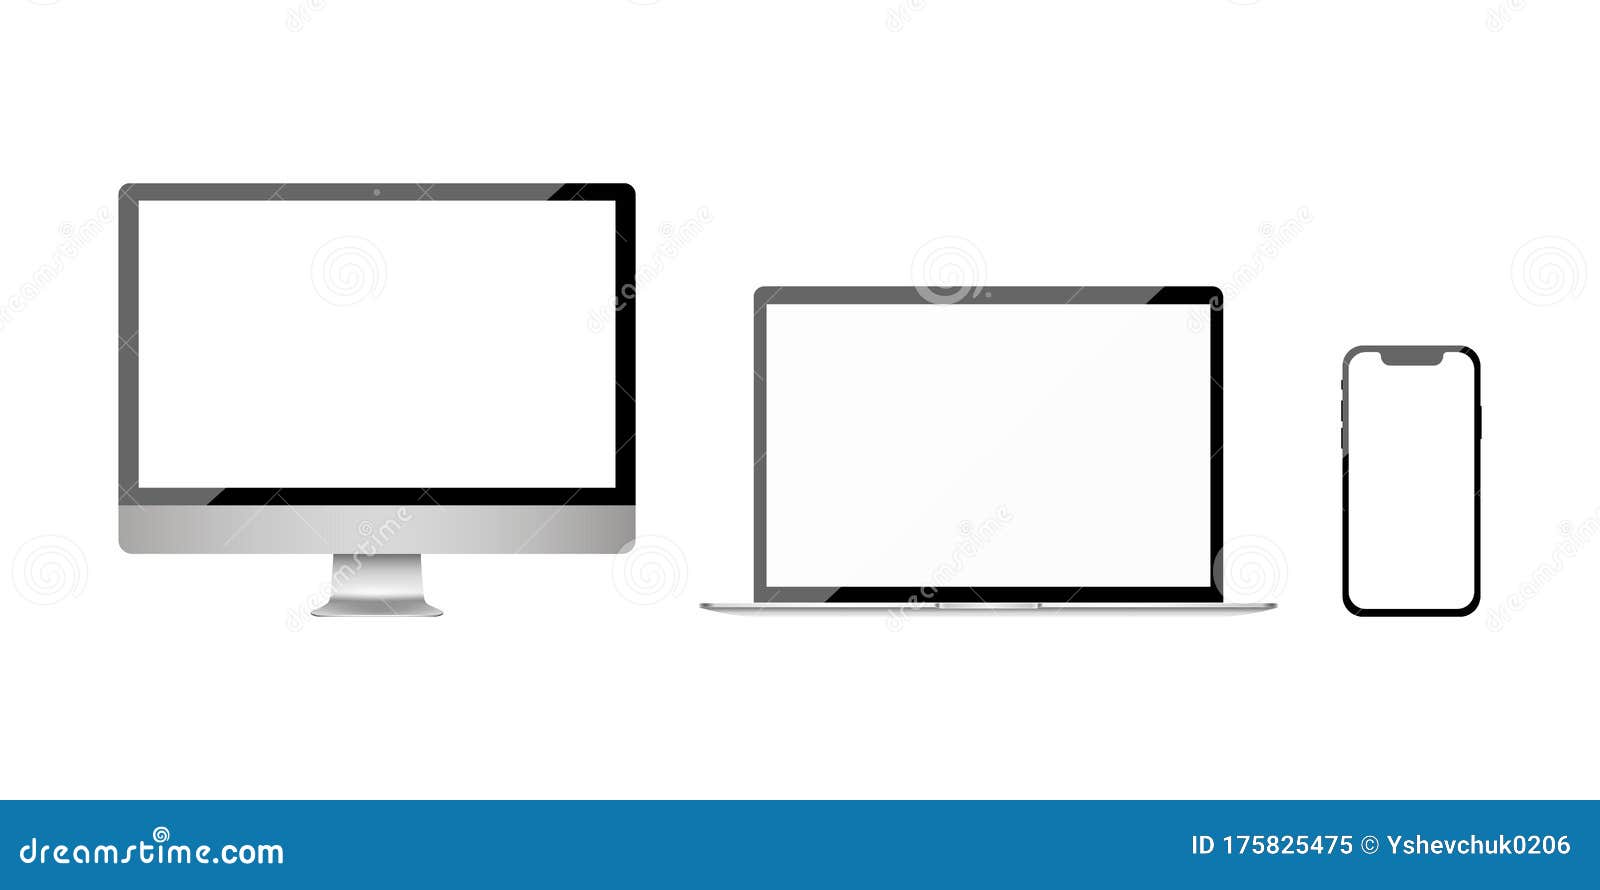 apple imac, macbook and iphone. realistic modern monitor, computer, laptop, smart phone. device mockup. electronics industry.